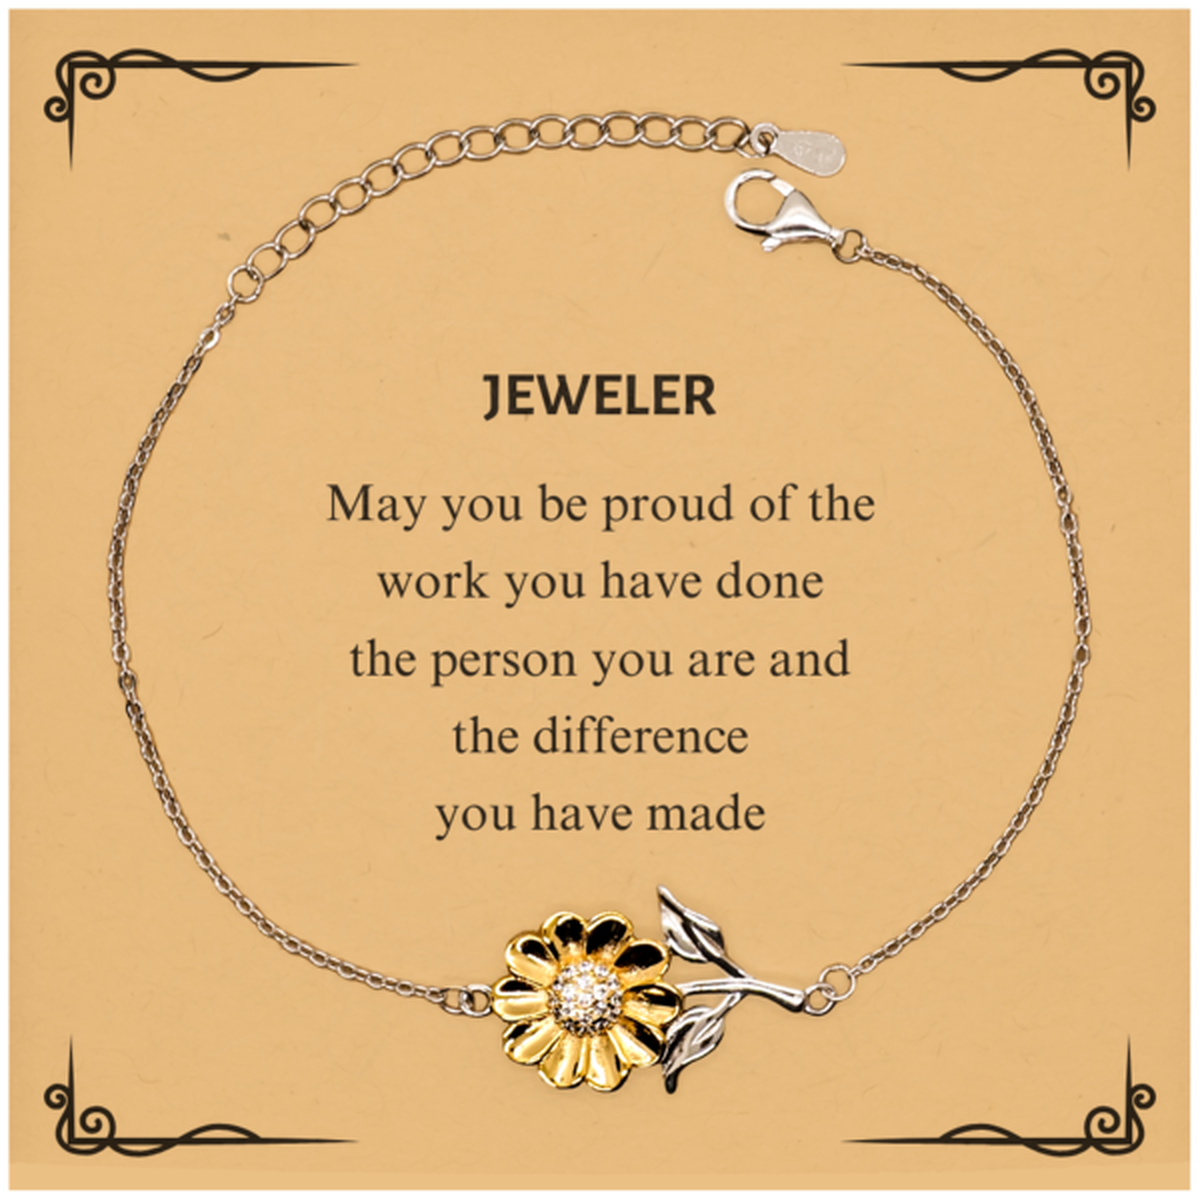 Jeweler May you be proud of the work you have done, Retirement Jeweler Sunflower Bracelet for Colleague Appreciation Gifts Amazing for Jeweler